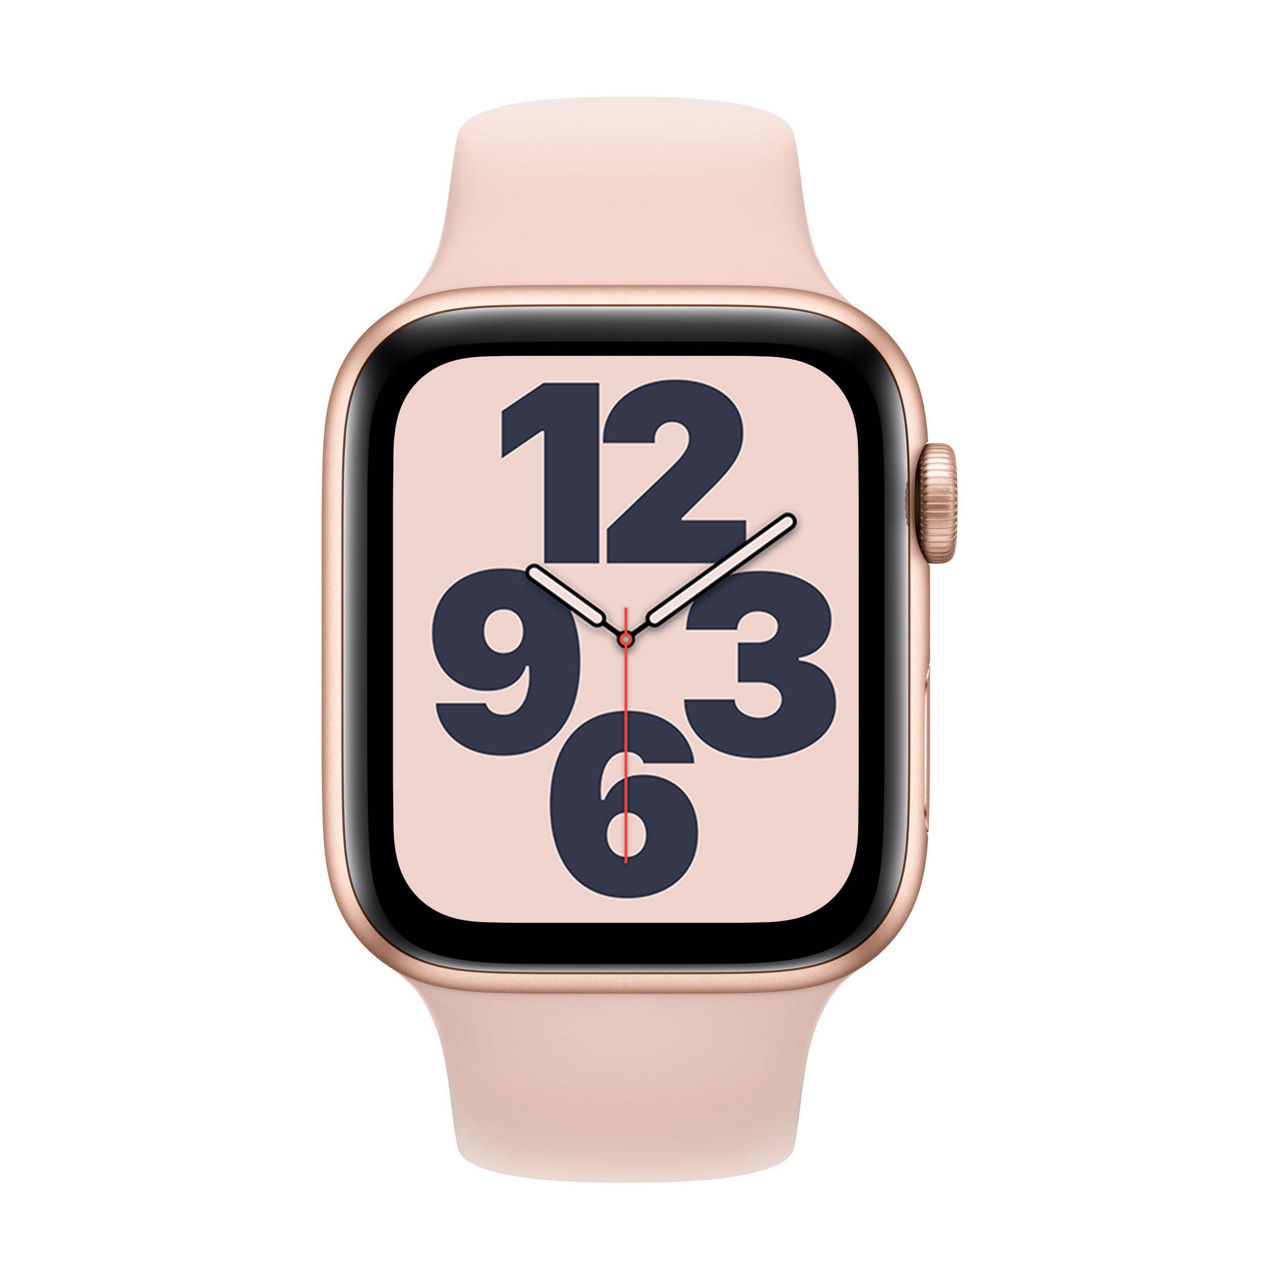 Apple Watch Series 5 (GPS, 40MM) - Gold Aluminum Case with Pink Sand Sport  Band (Renewed)